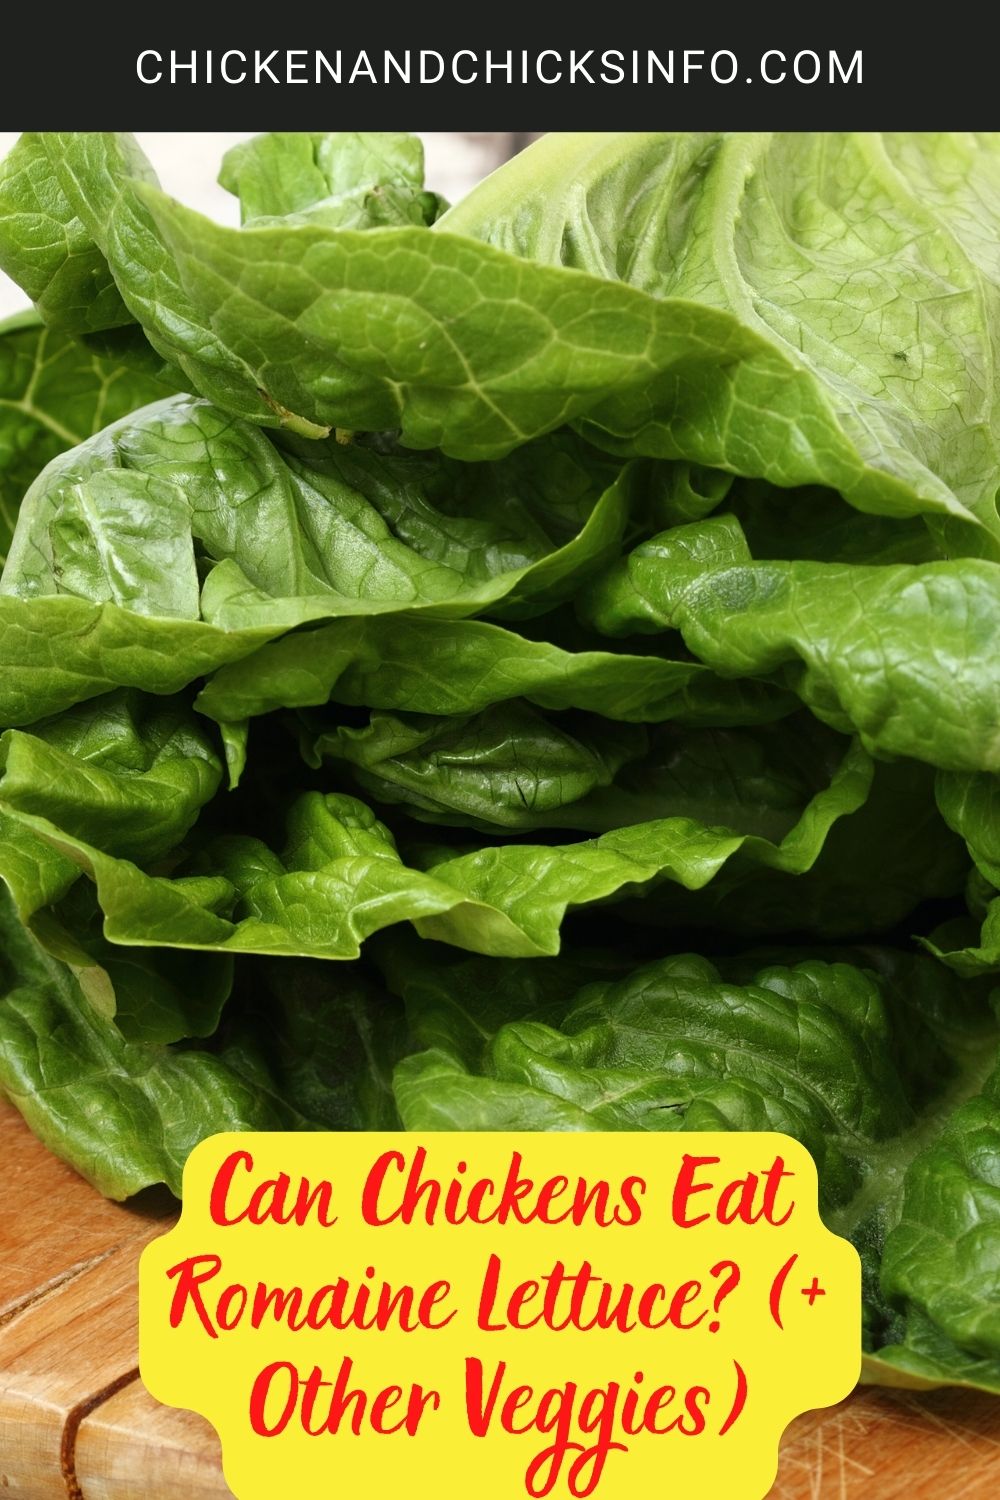 Can Chickens Eat Romaine Lettuce? (+ Other Veggies) poster.
